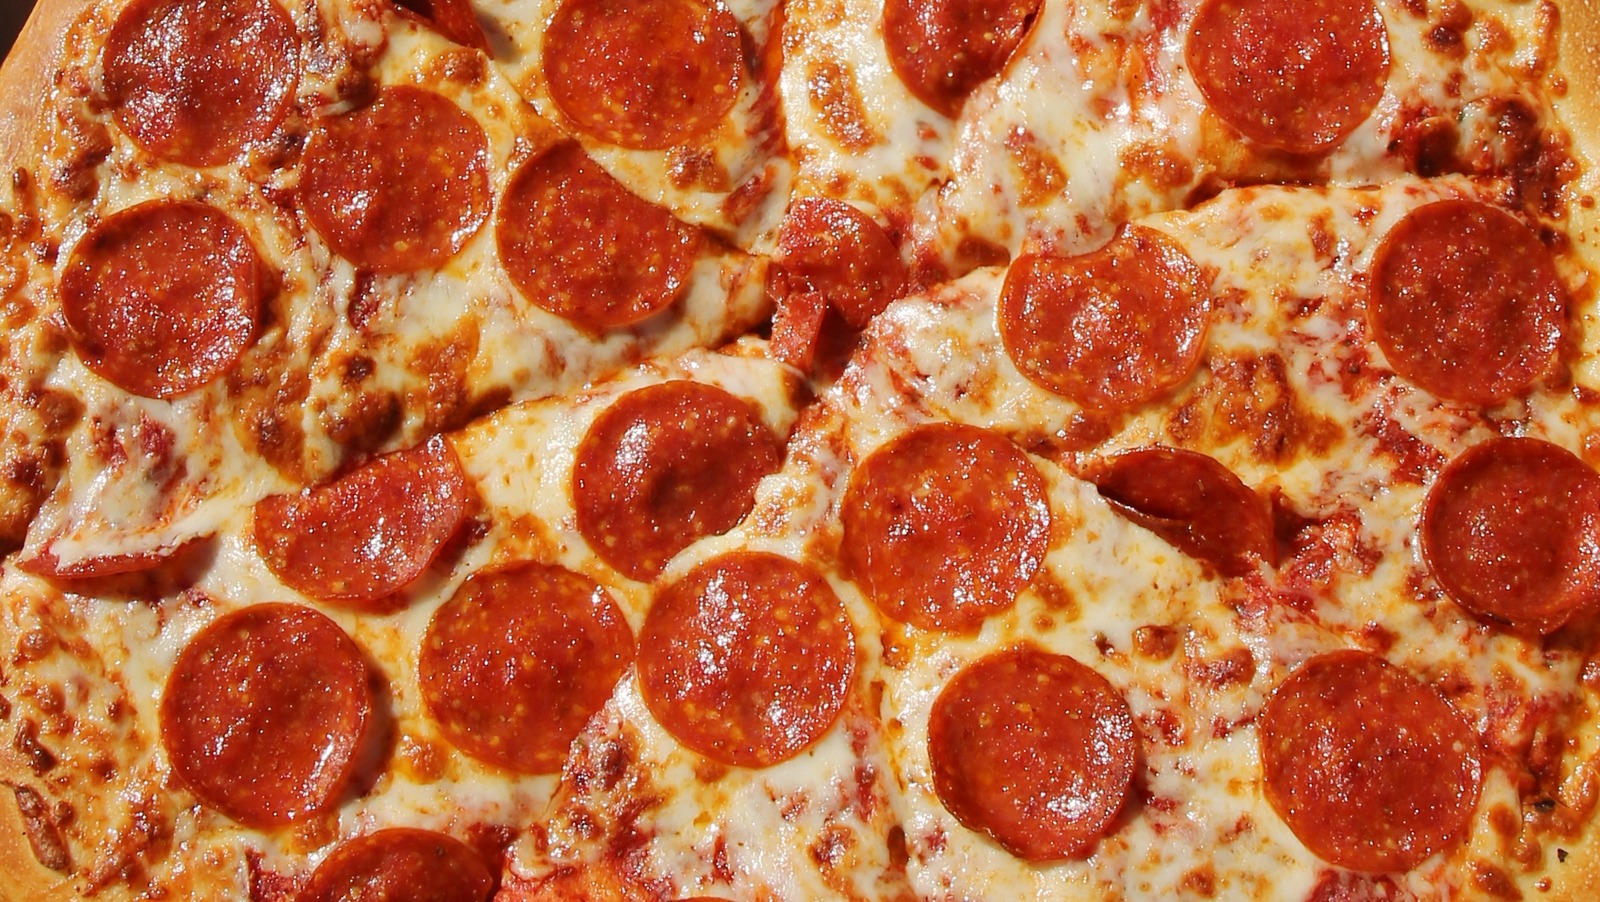 Little Caesars Just Announced A Partnership With A Super BowlWinning